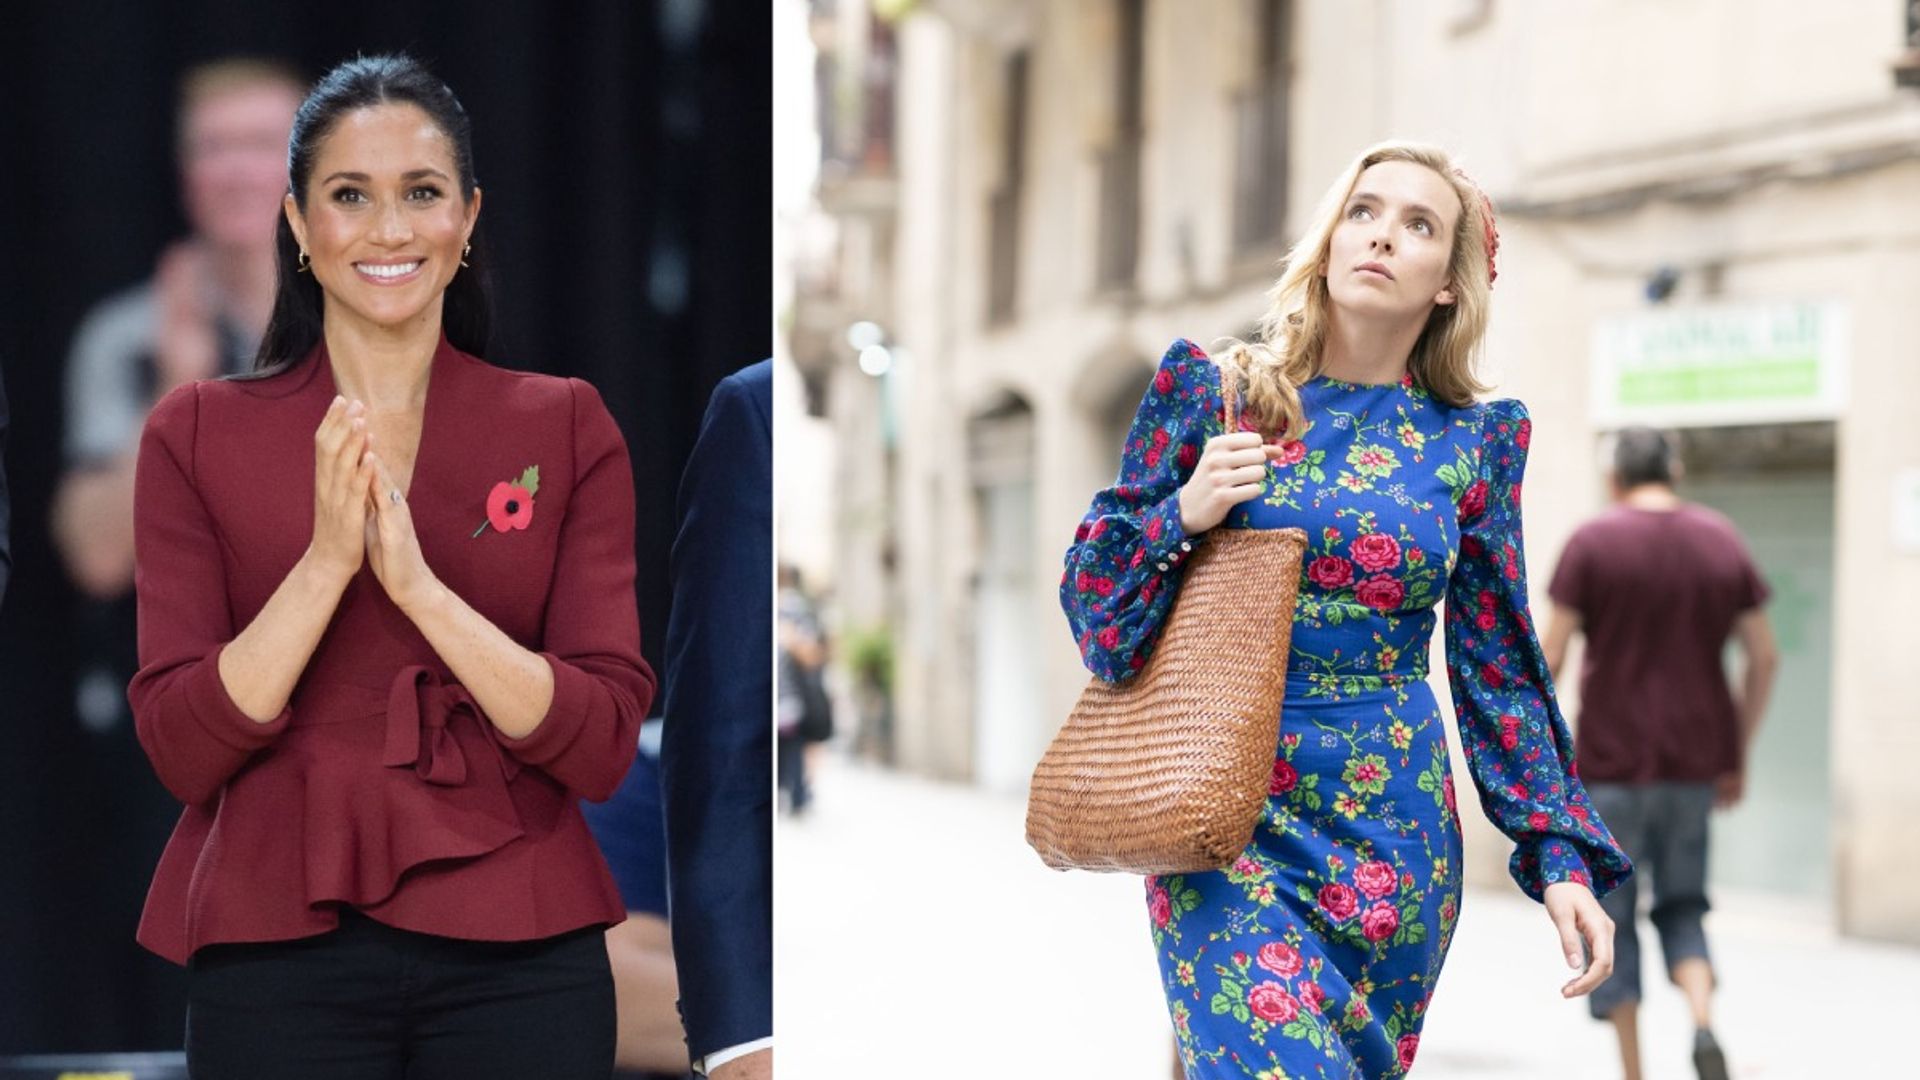 Killing Eve is back, and Jodie Comer's wardrobe is royally-approved